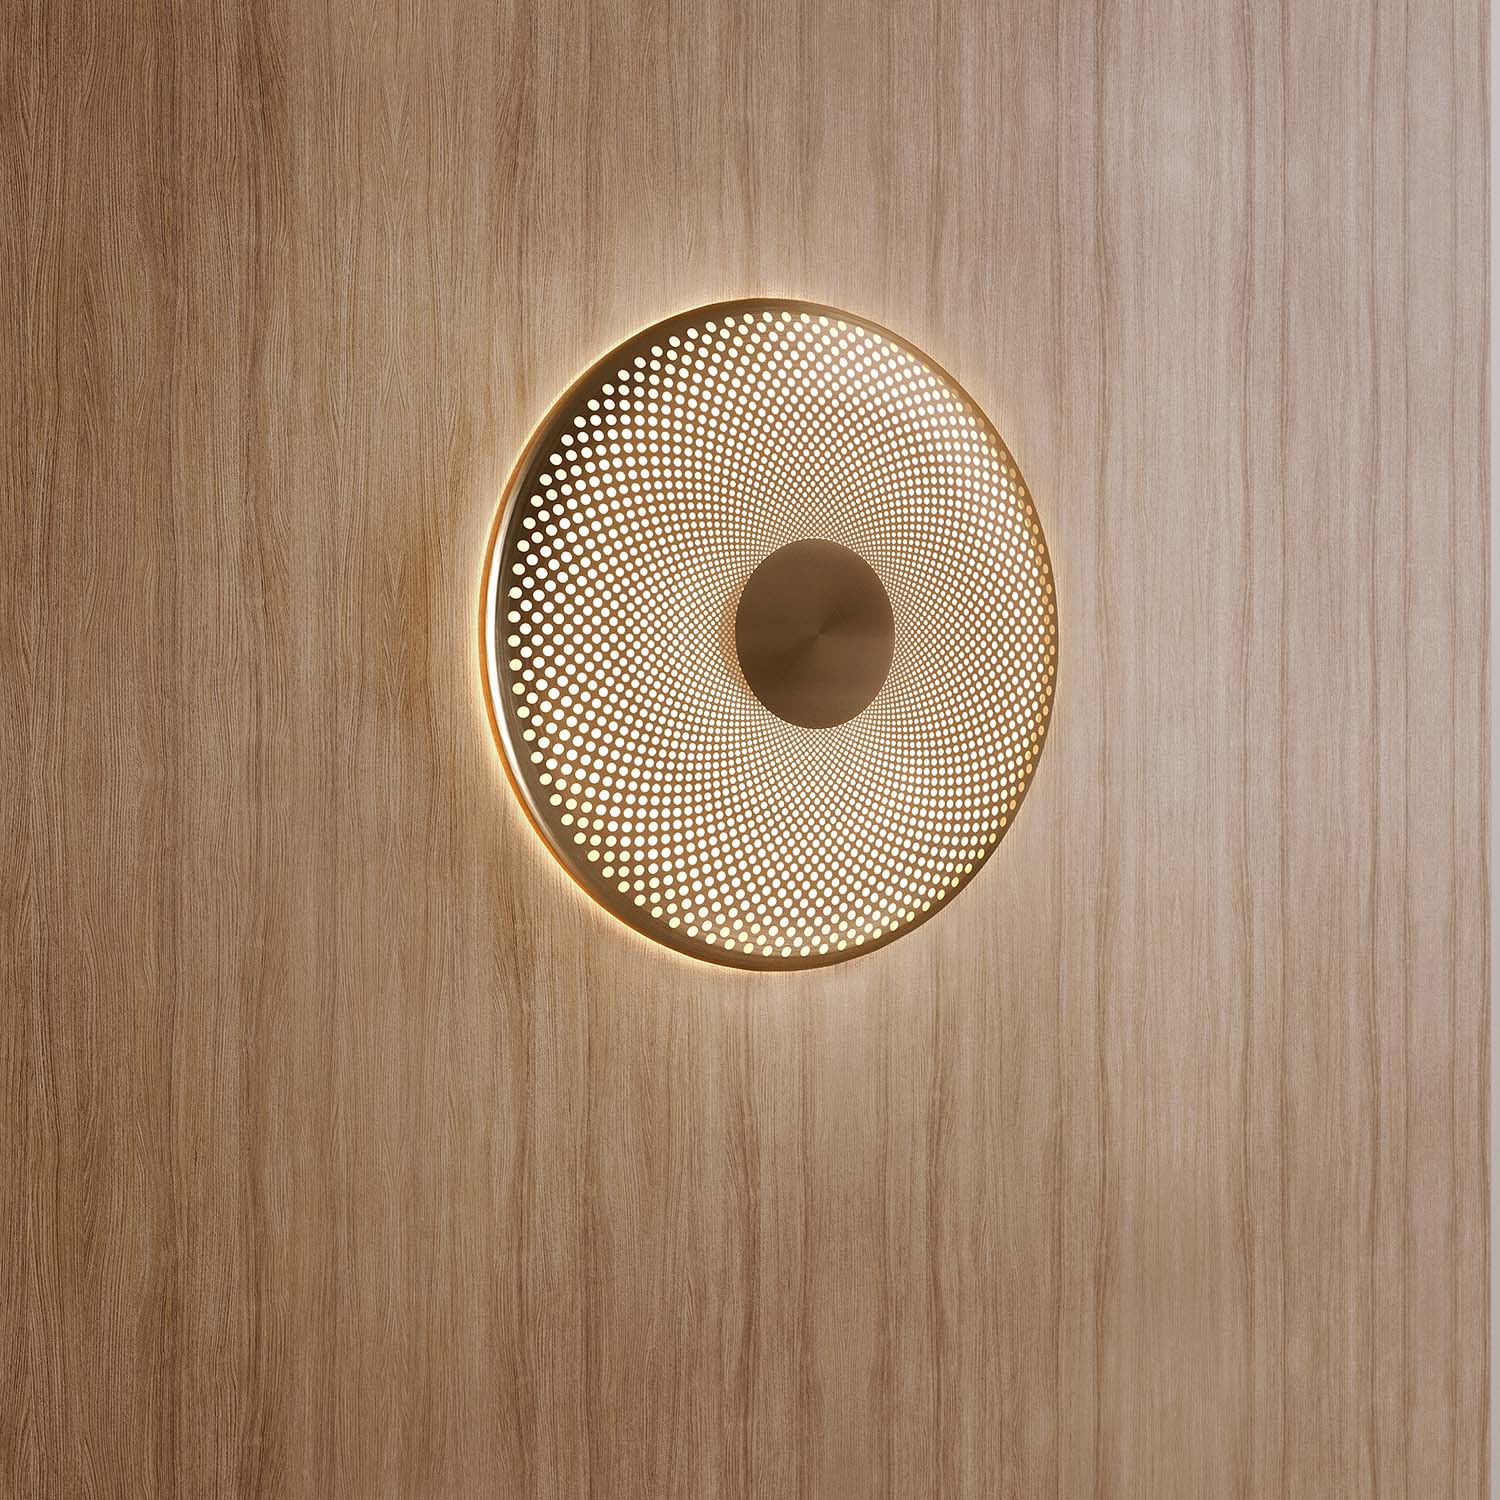 GLINT - Design, modern and contemporary round wall light